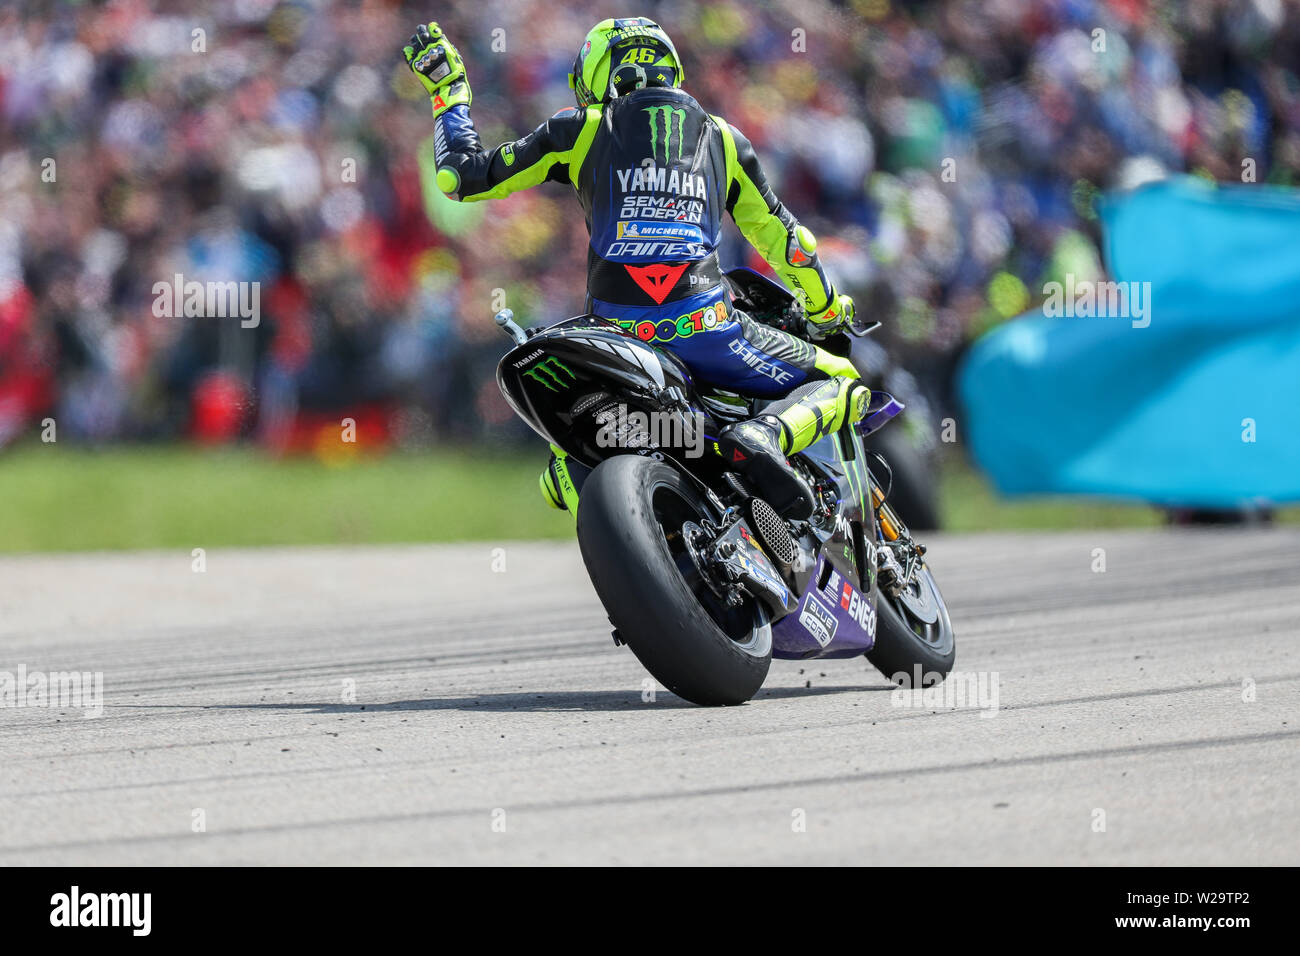 Hohenstein Ernstthal, Germany. 07th July, 2019. Motorsport/Motorcycle,  Grand Prix of Germany, MotoGP at the Sachsenring: Rider Valentino Rossi  (Italy, Monster Energy Yamaha MotoGP Team) looks disappointed after the  race. Credit: Jan Woitas/dpa ...